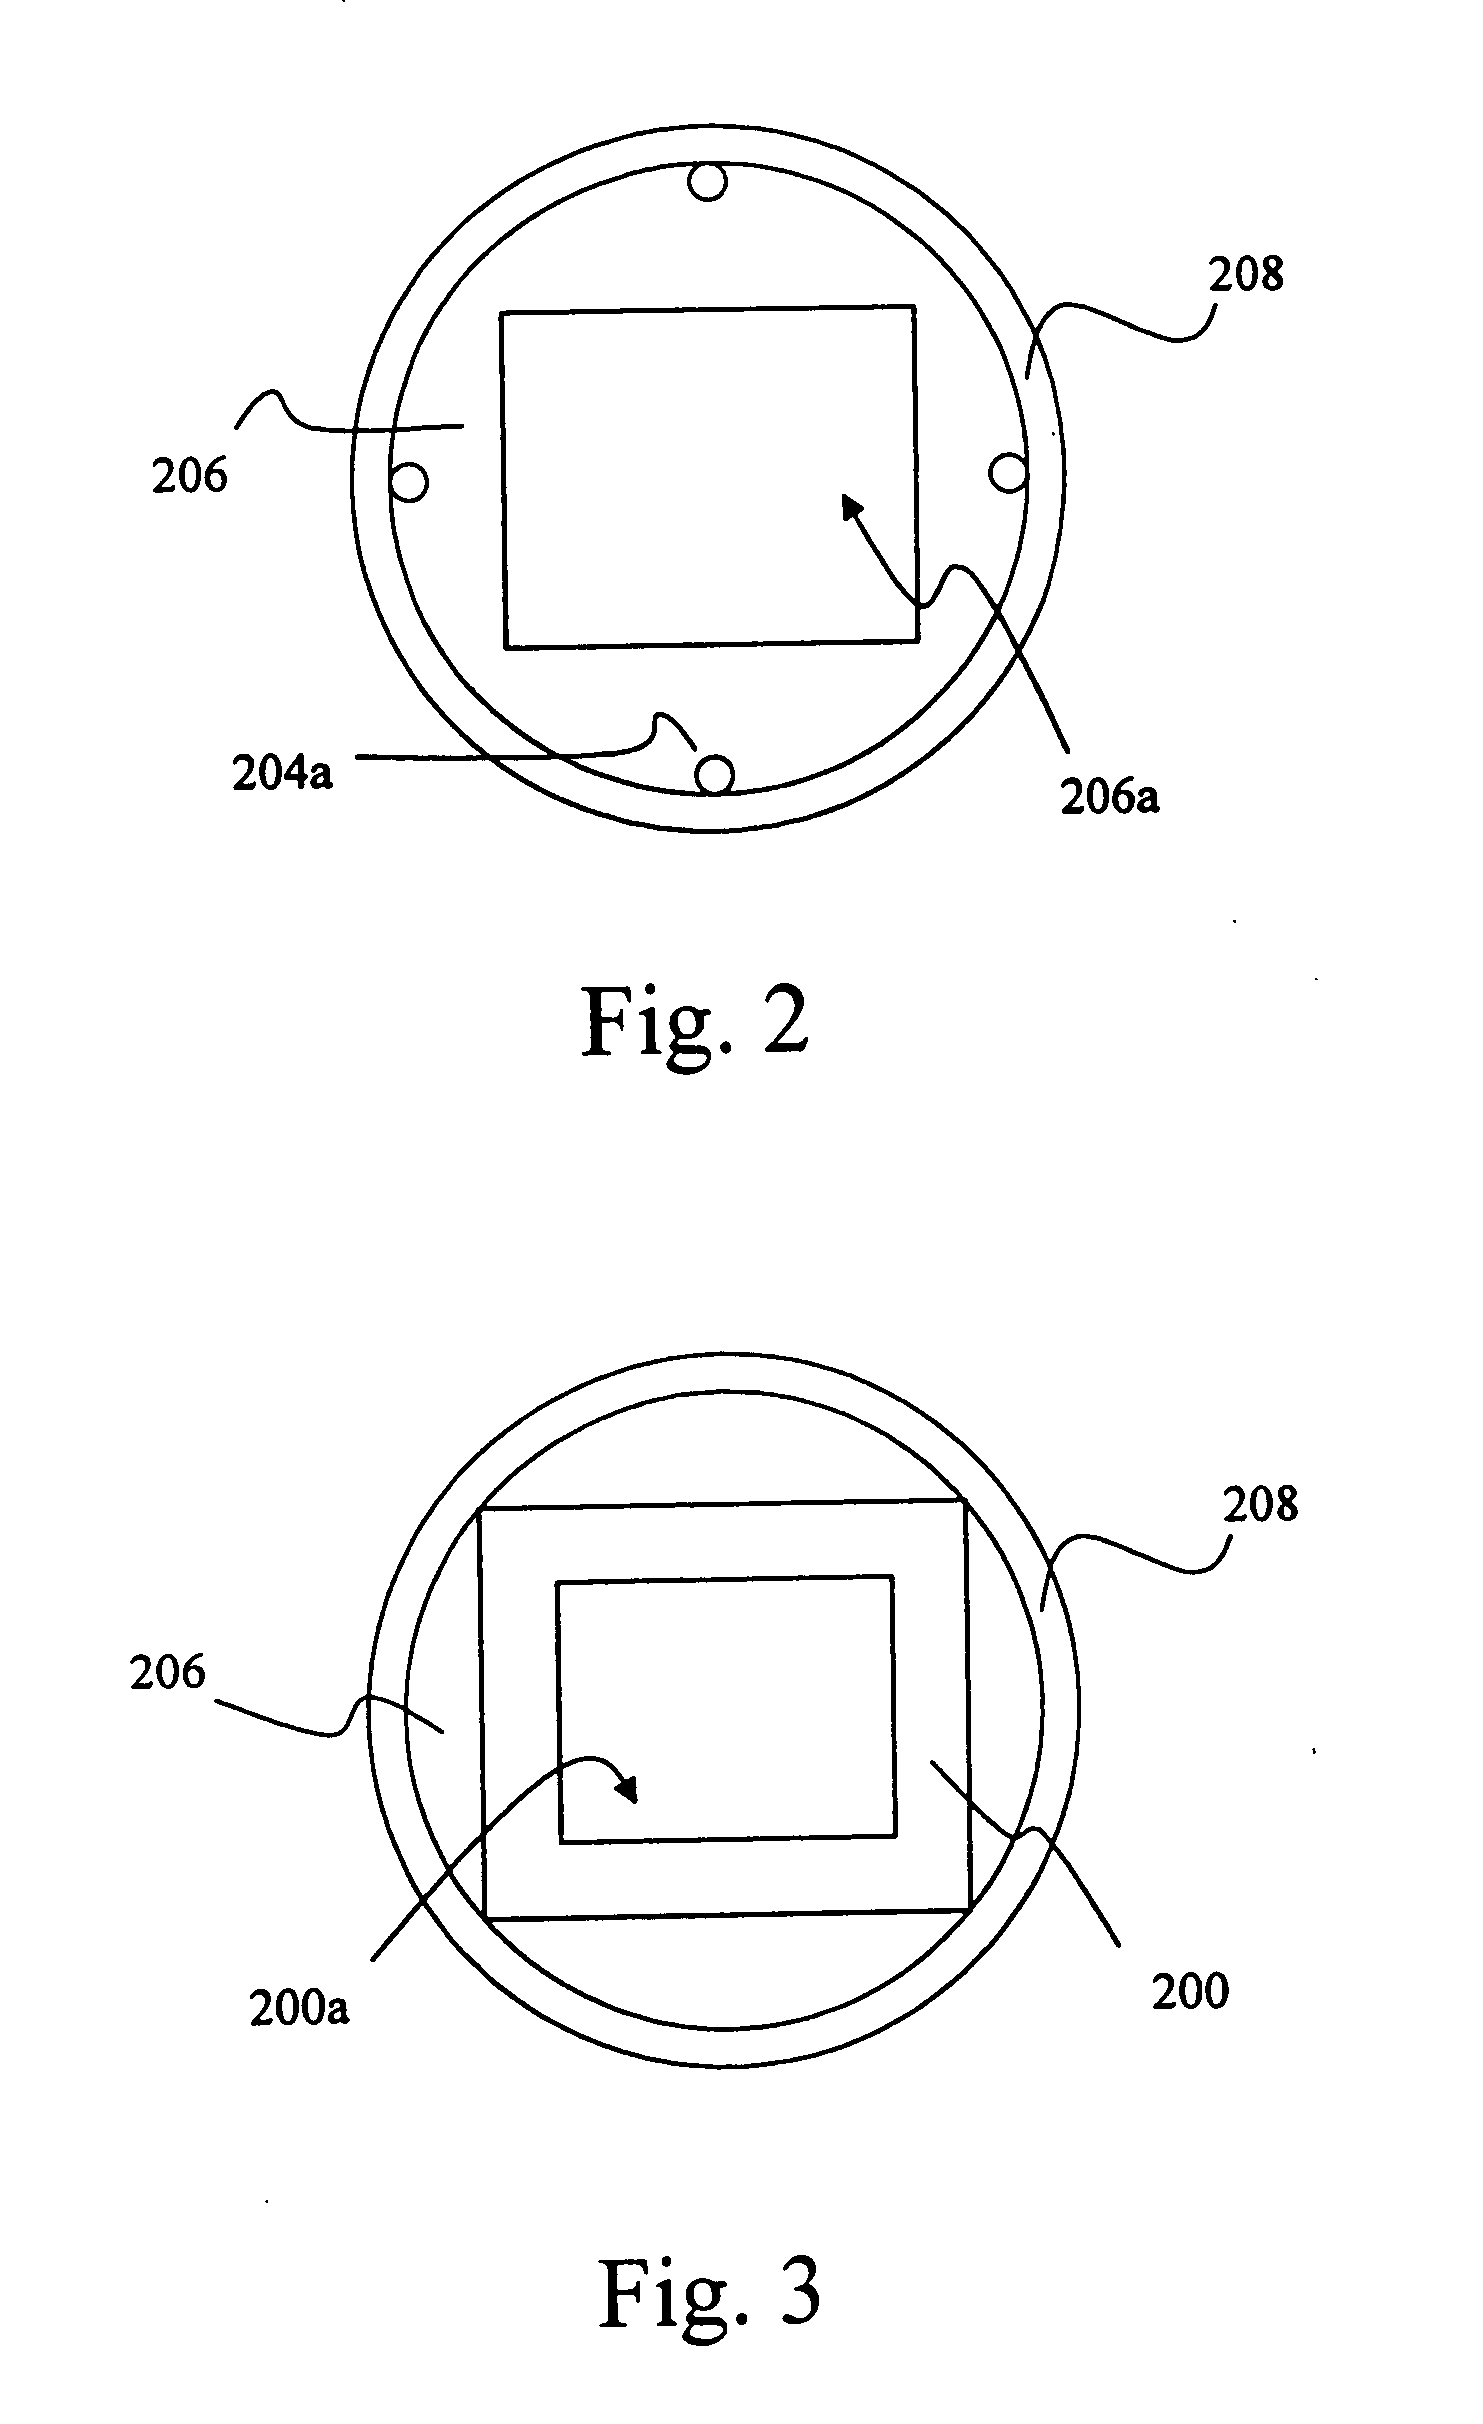 Cold shield for cryogenic camera